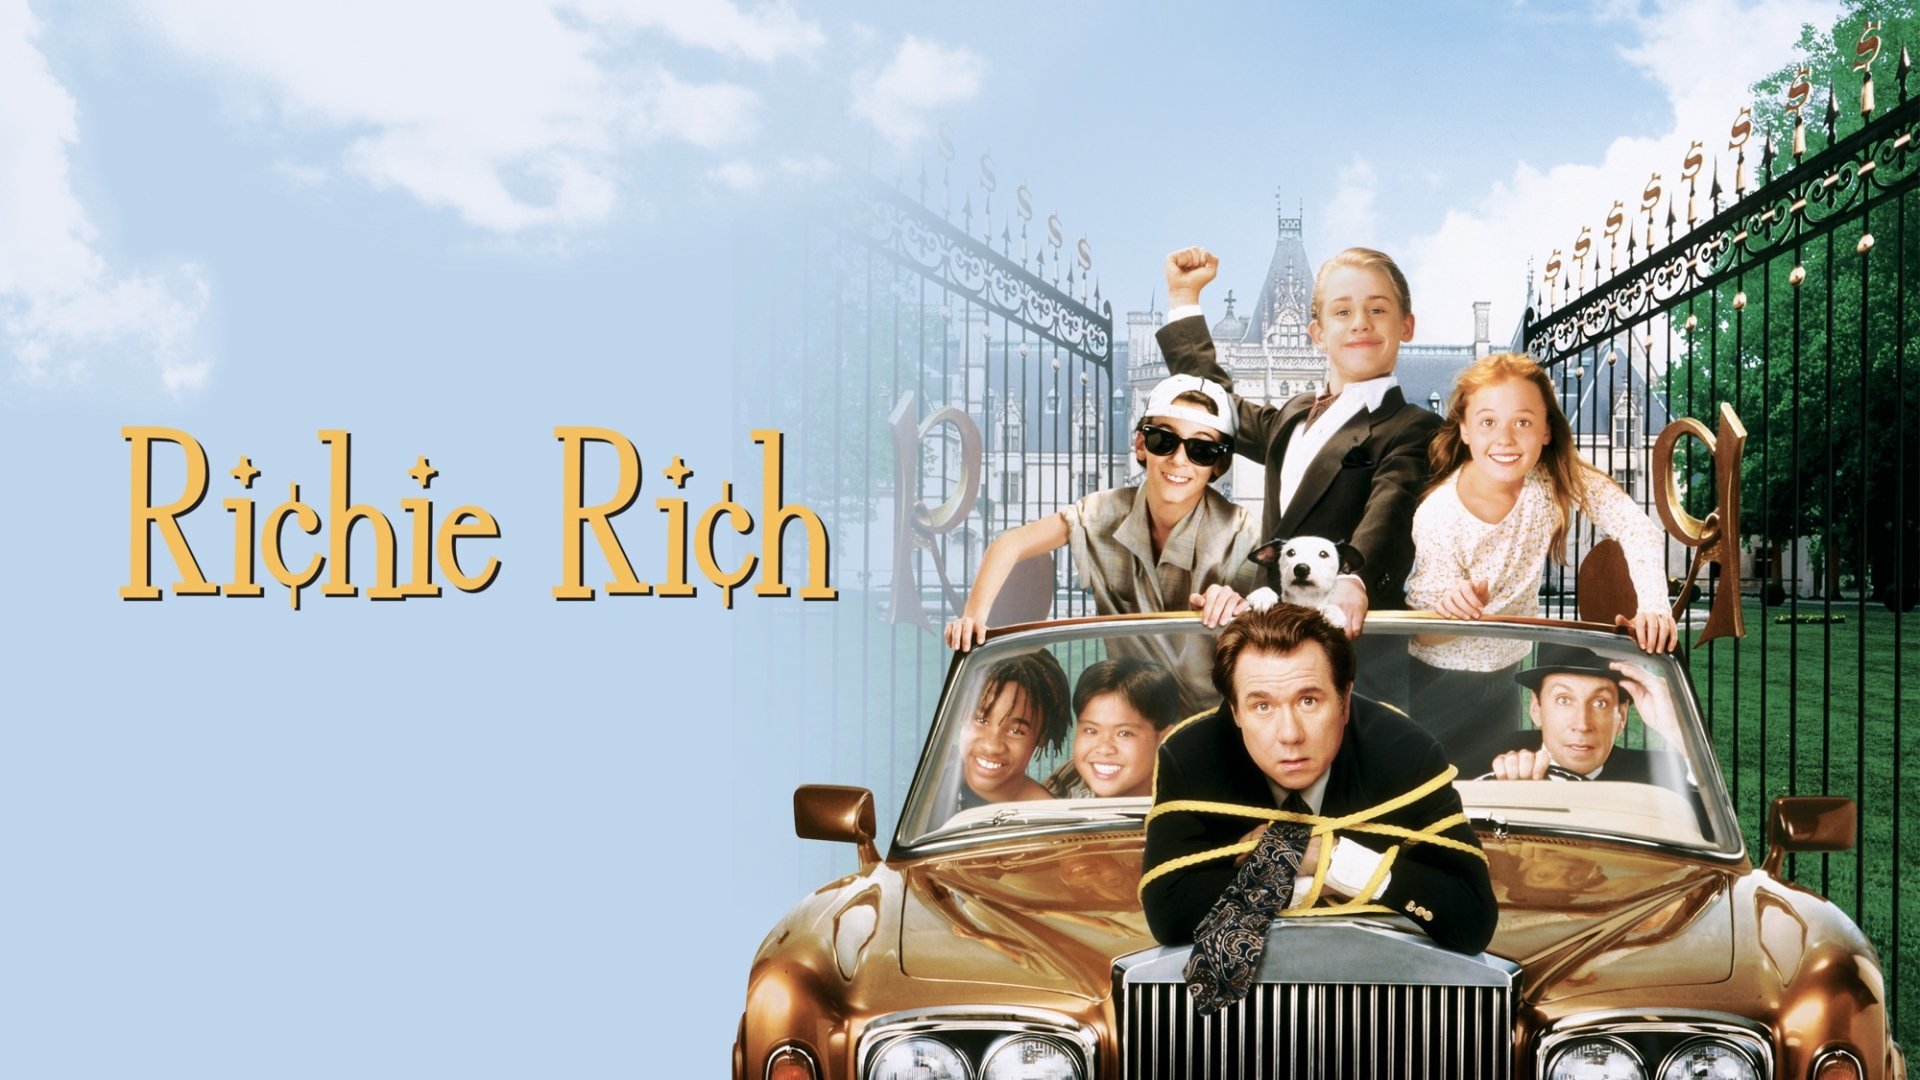 Richie Rich  6 For Sale on 1stDibs  richie rich wallpaper richie rich  art monopoly richie rich wallpaper